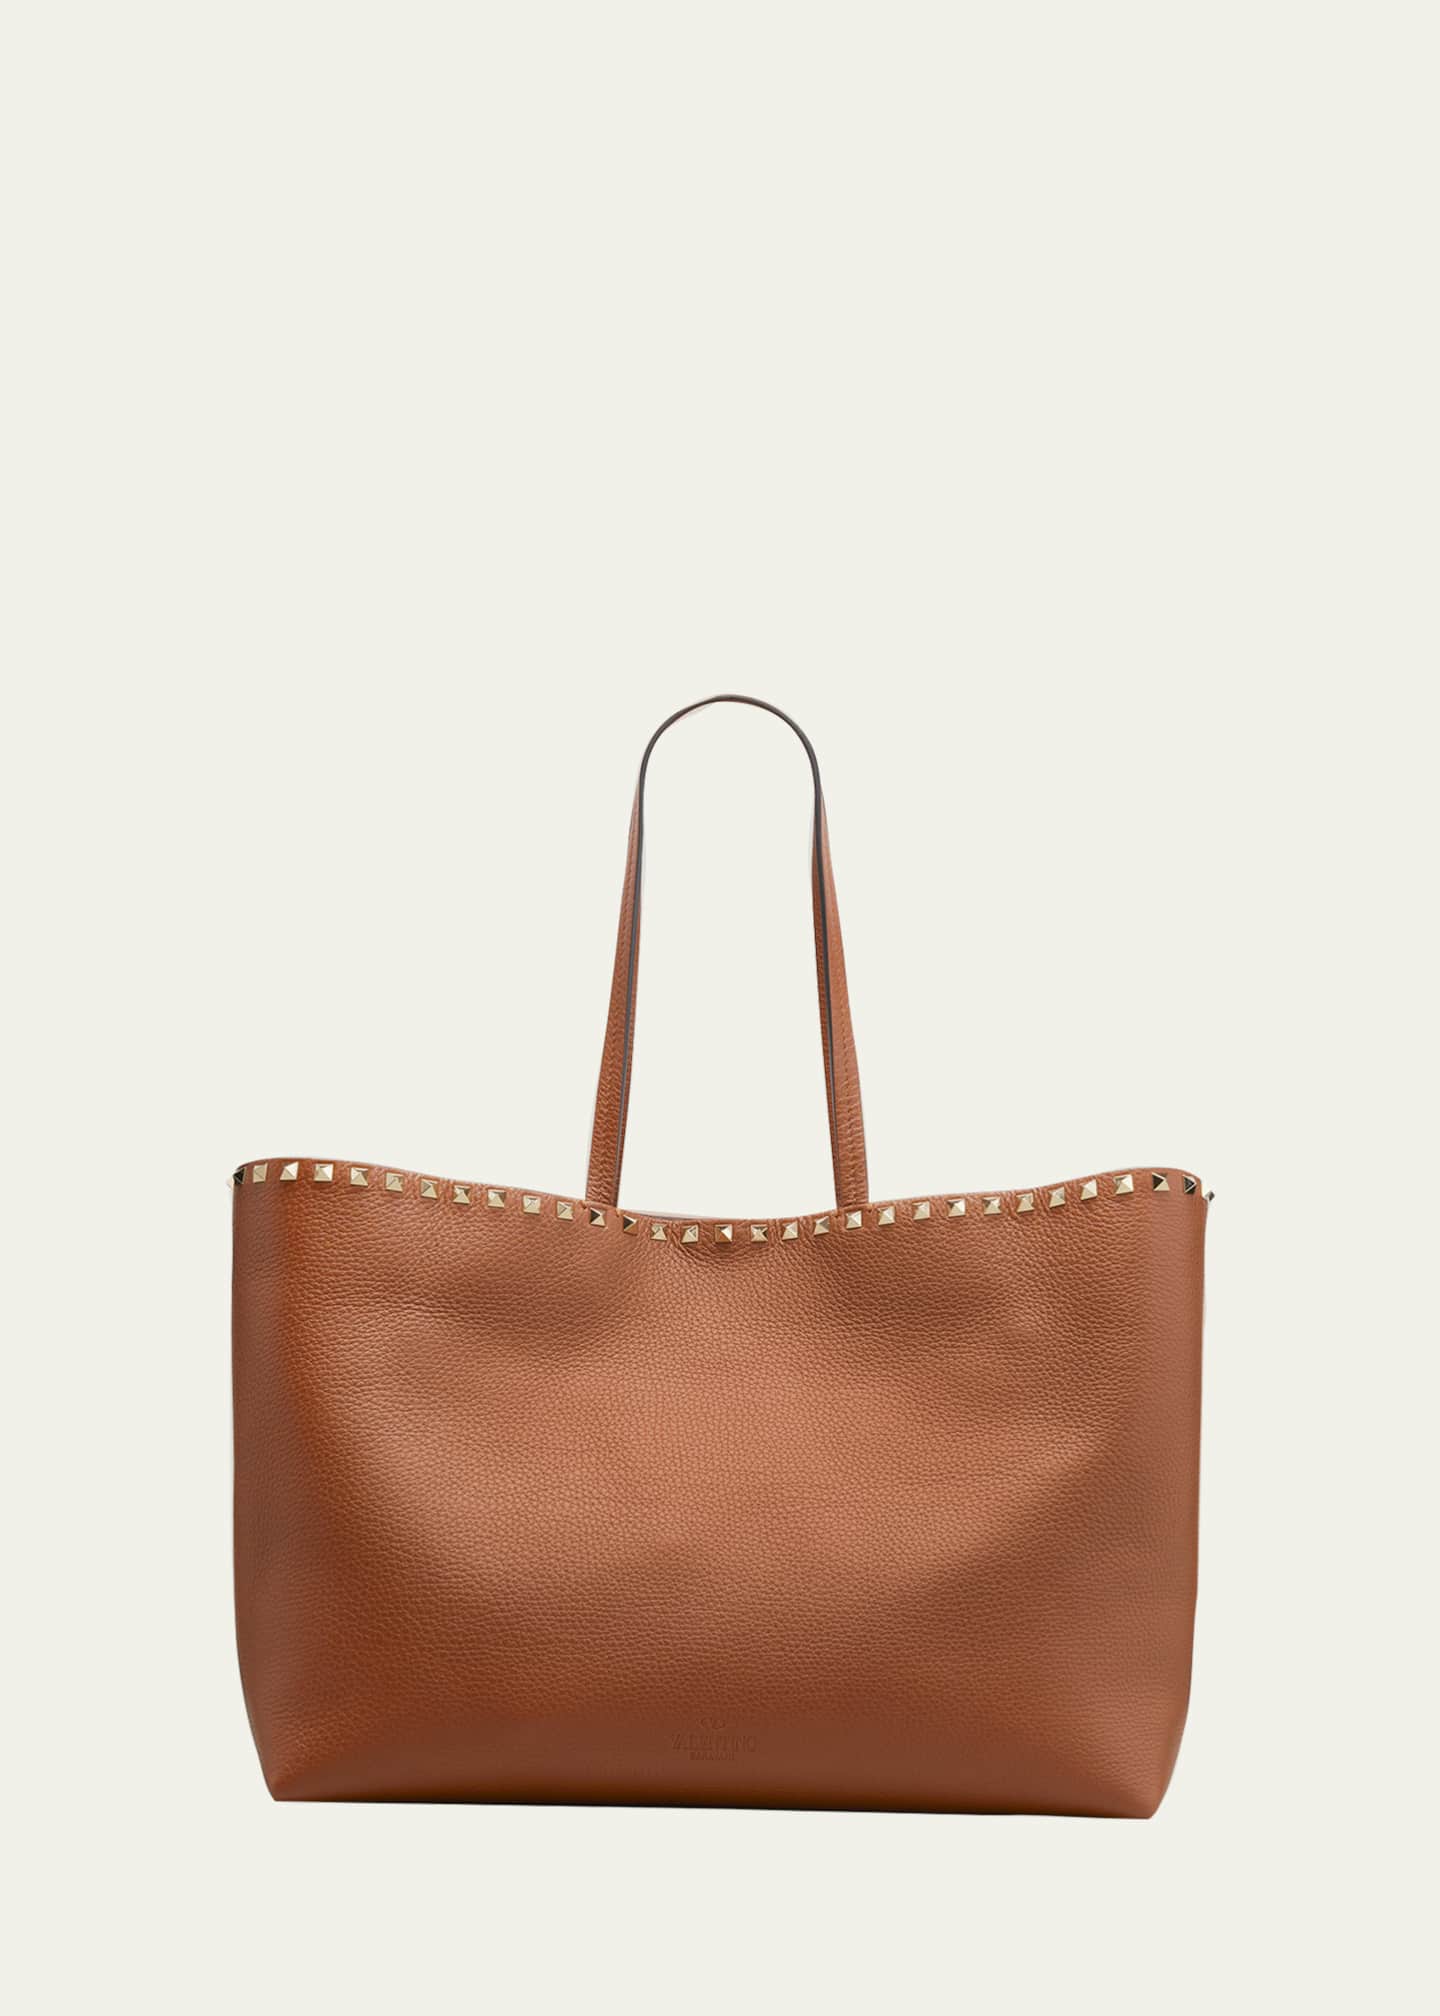 VALENTINO Rockstud Small Double Handle Leather Tote Bag Camel Brown-US